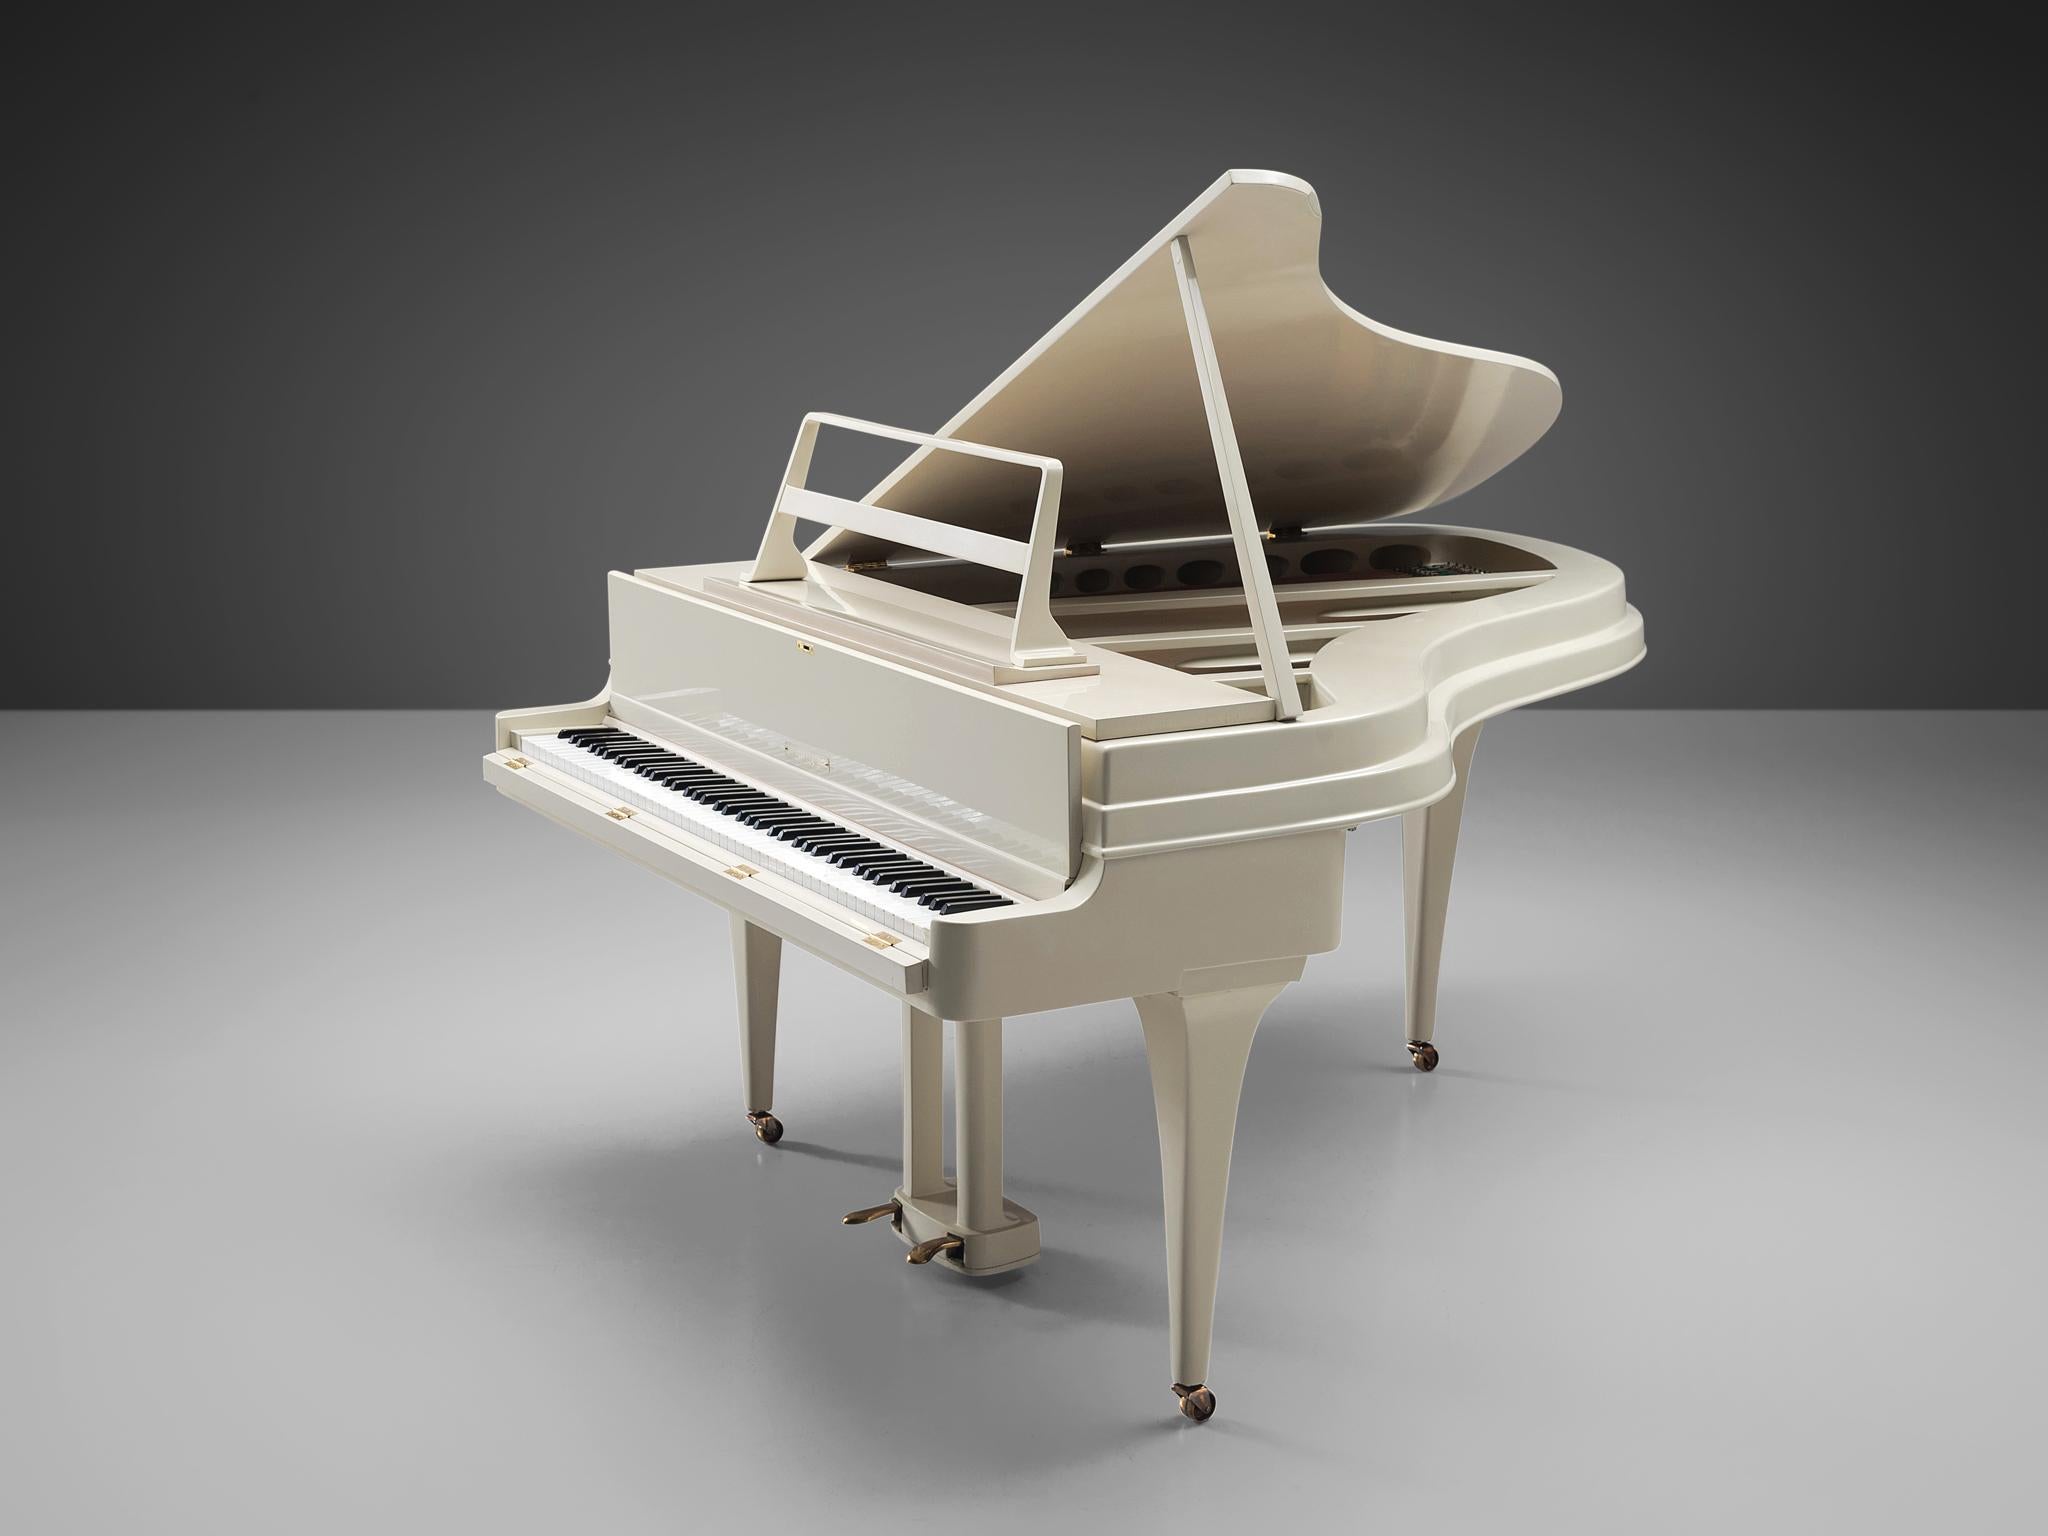 J.J. Rippen for Rippen Pianofabriek N.V, grand piano, cast aluminum, wood, brass, The Netherlands, design 1946, production 1950s. 

This model is a renowned grand piano conceived by the Dutch piano maker Rippen situated in Ede, The Netherlands. The